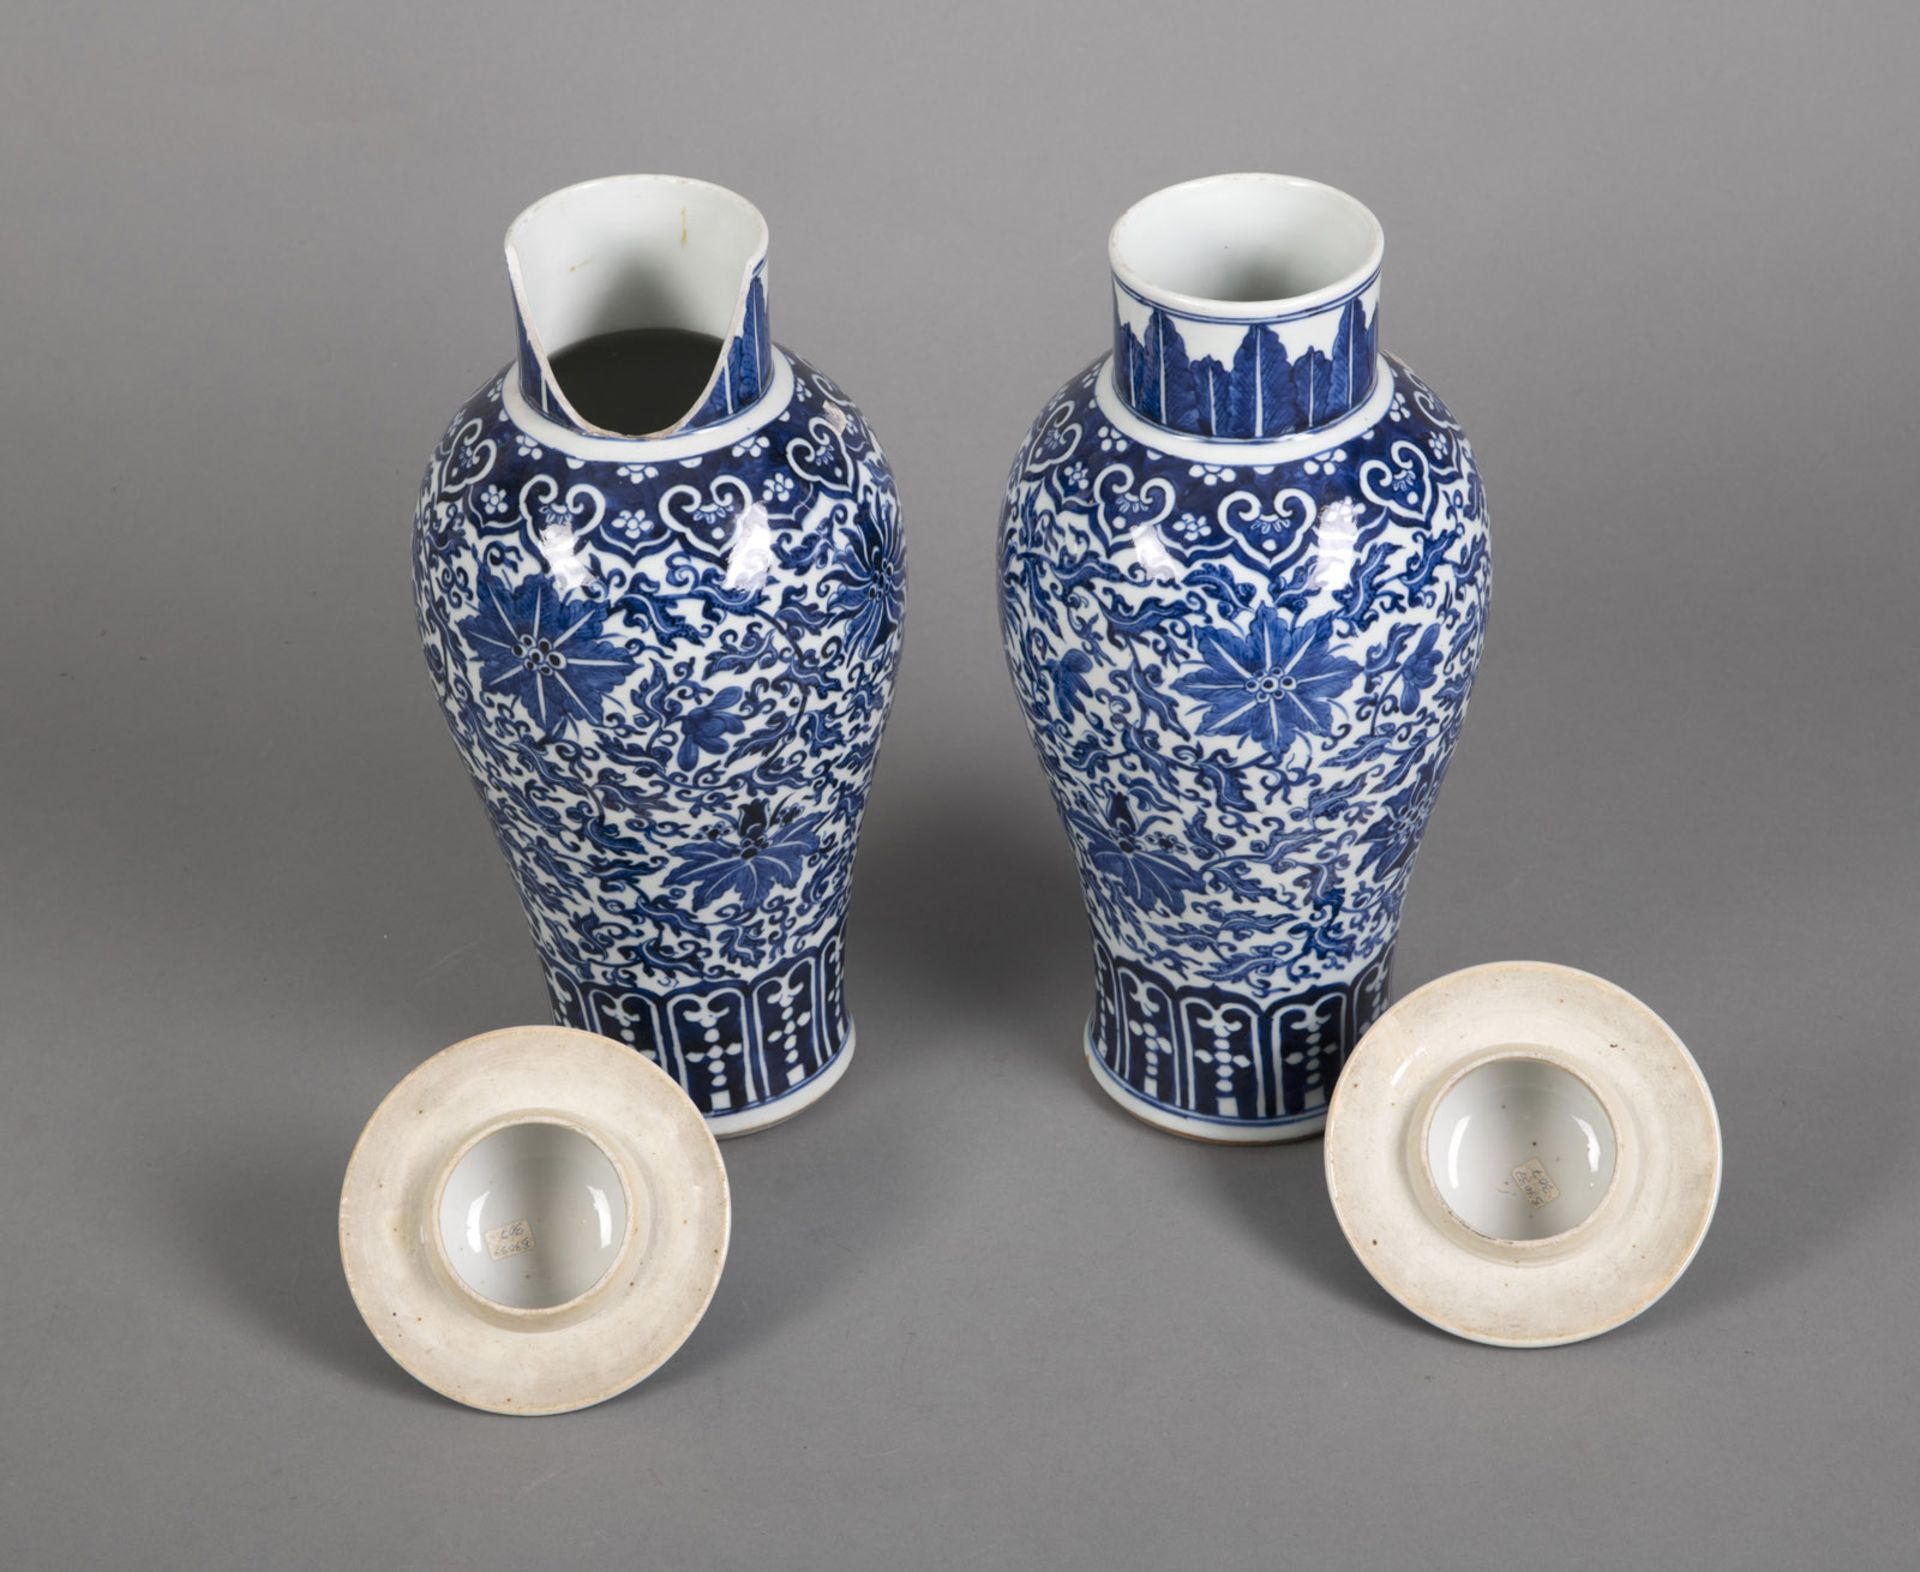 A PAIR OF BLUE AND WHITE PORCELAIN VASES WITH LION-HANDLED COVERS - Image 3 of 4